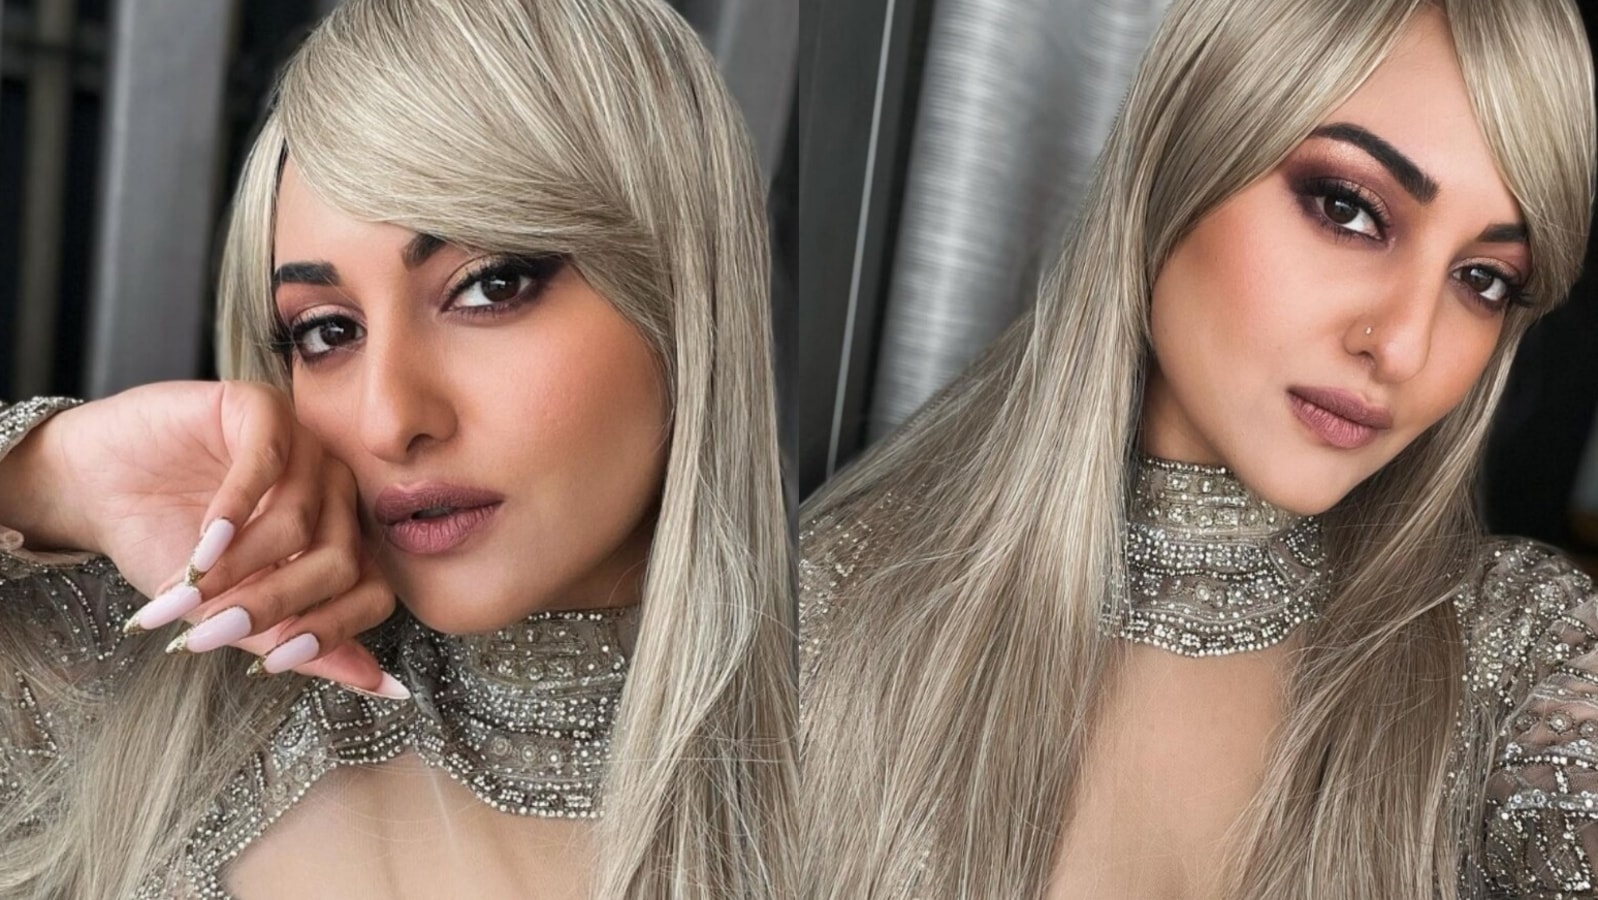 Huma Qureshi Wallpaper Bf Xxx - Sonakshi Sinha goes blonde in new pictures, Huma Qureshi calls them 'scary'  | Bollywood - Hindustan Times